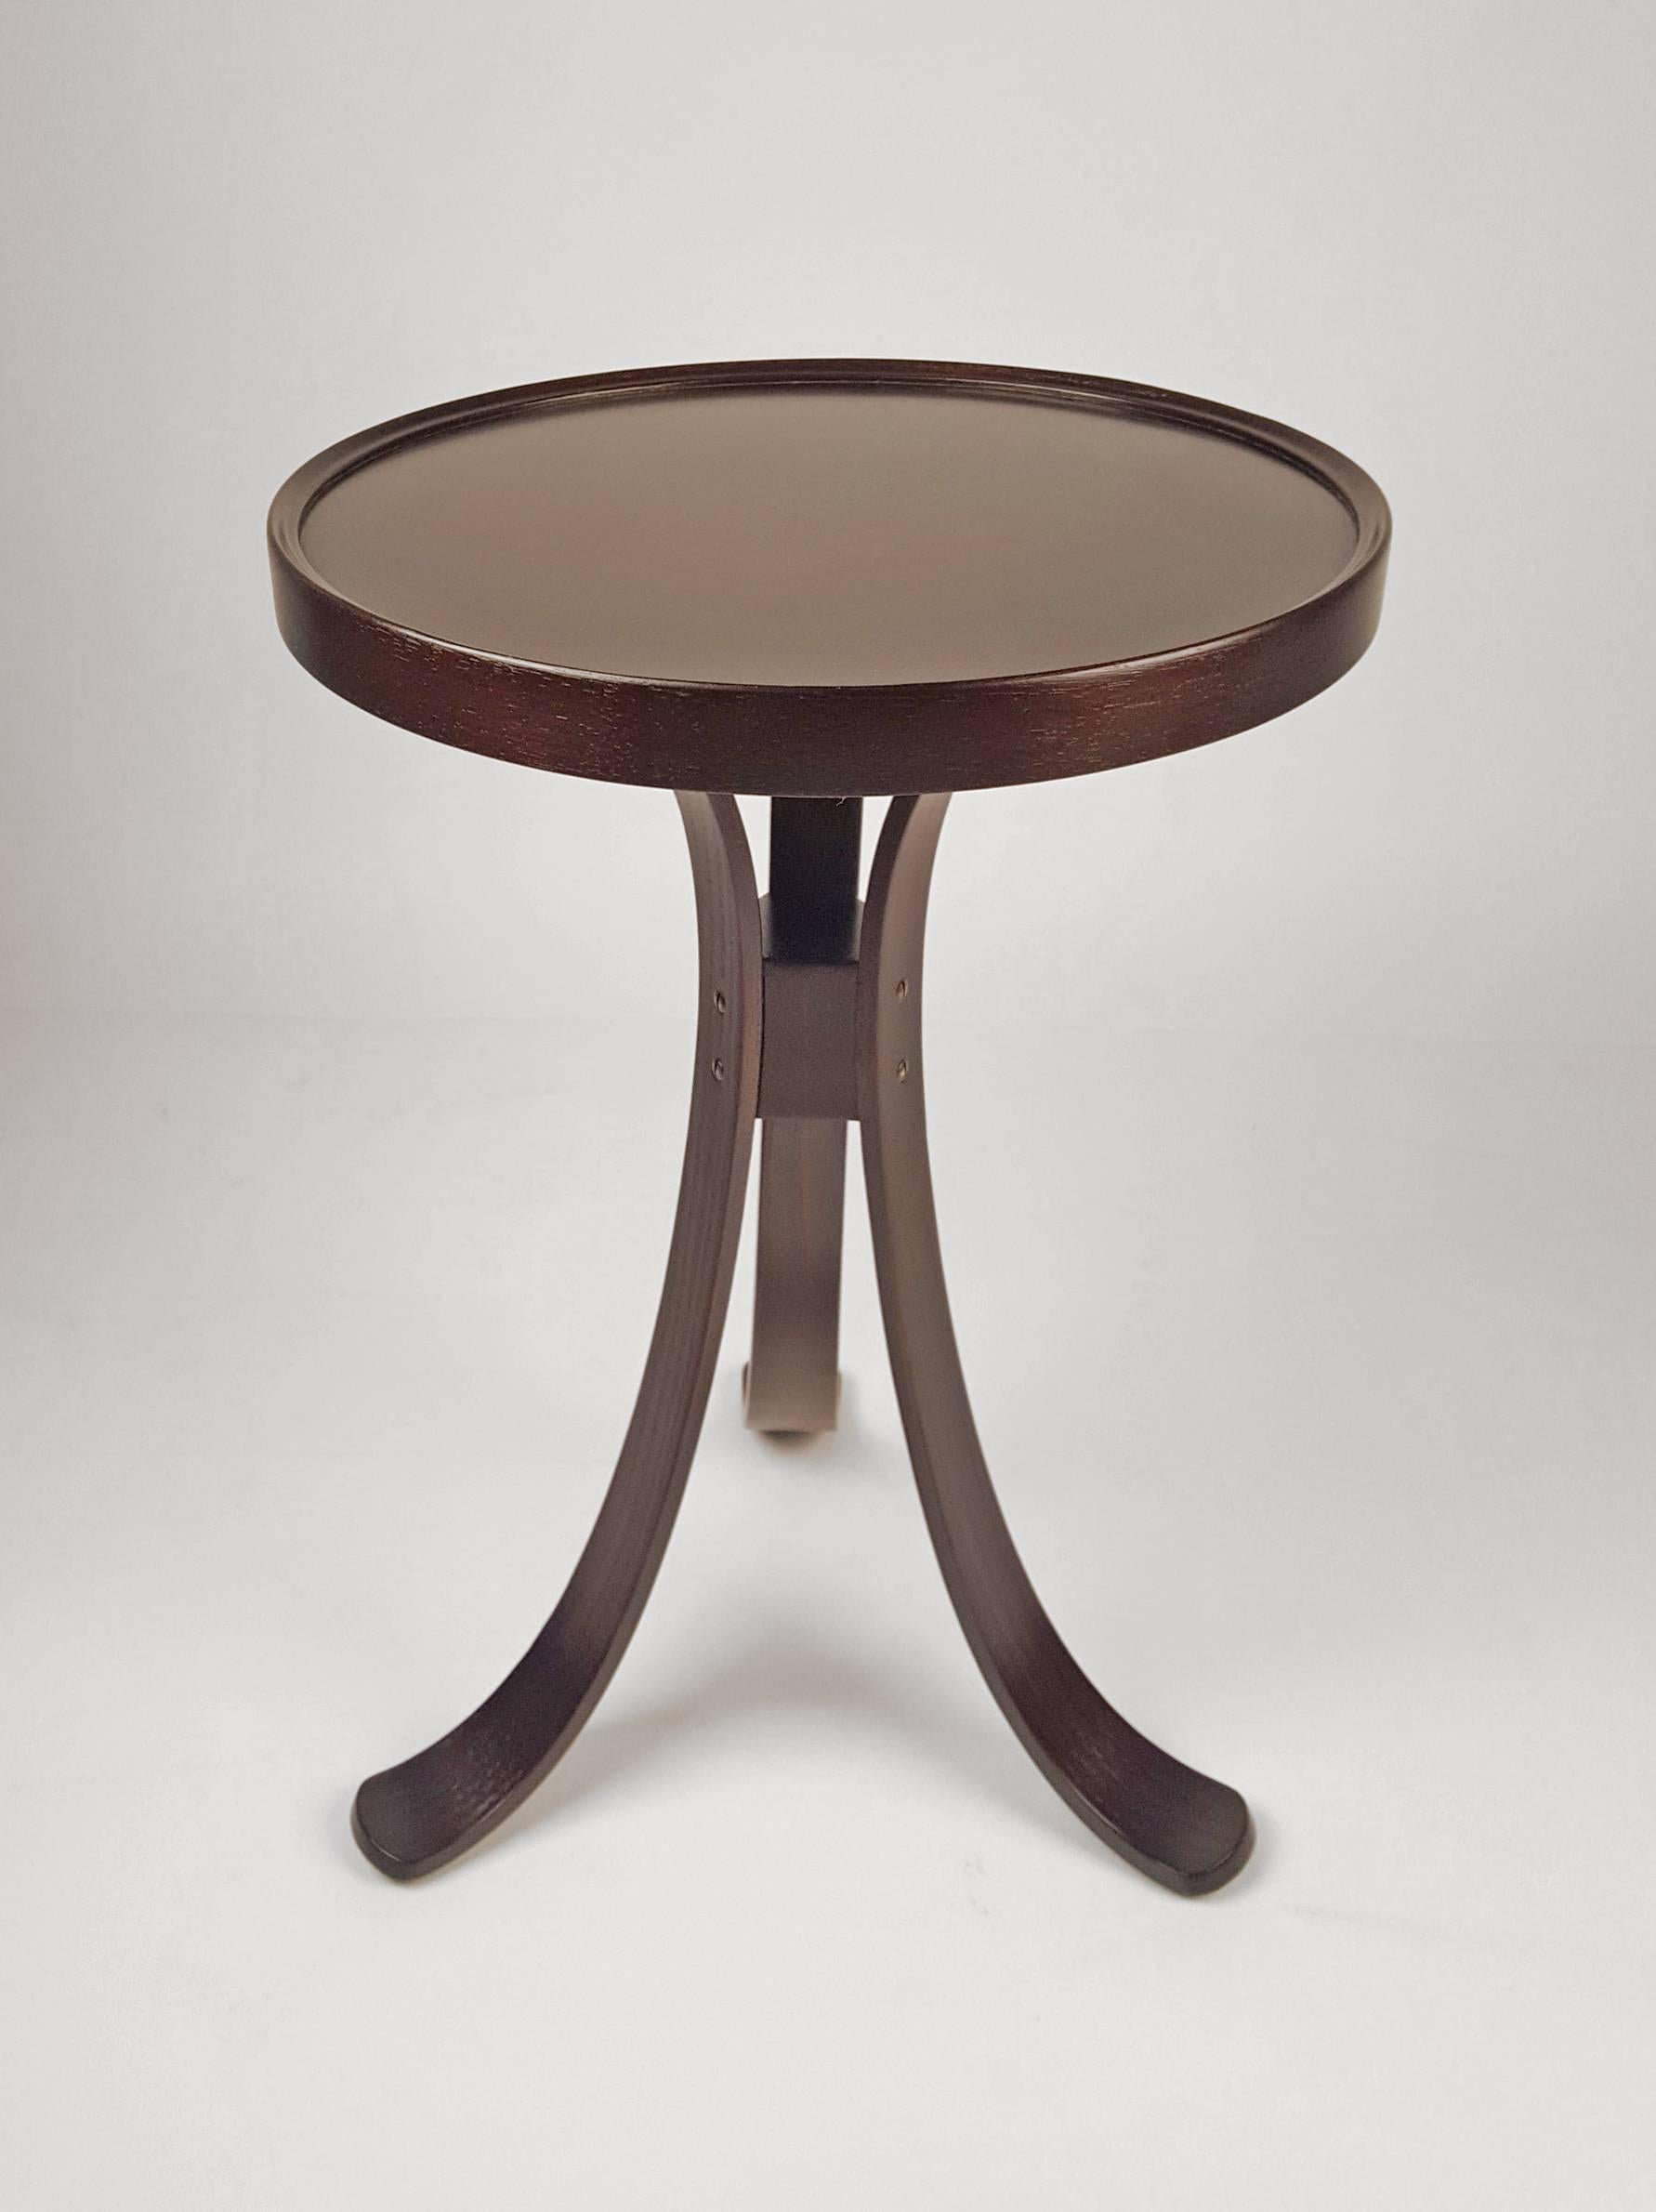 Mid-20th Century Tripod Drink Table by Roger Sprunger for Dunbar